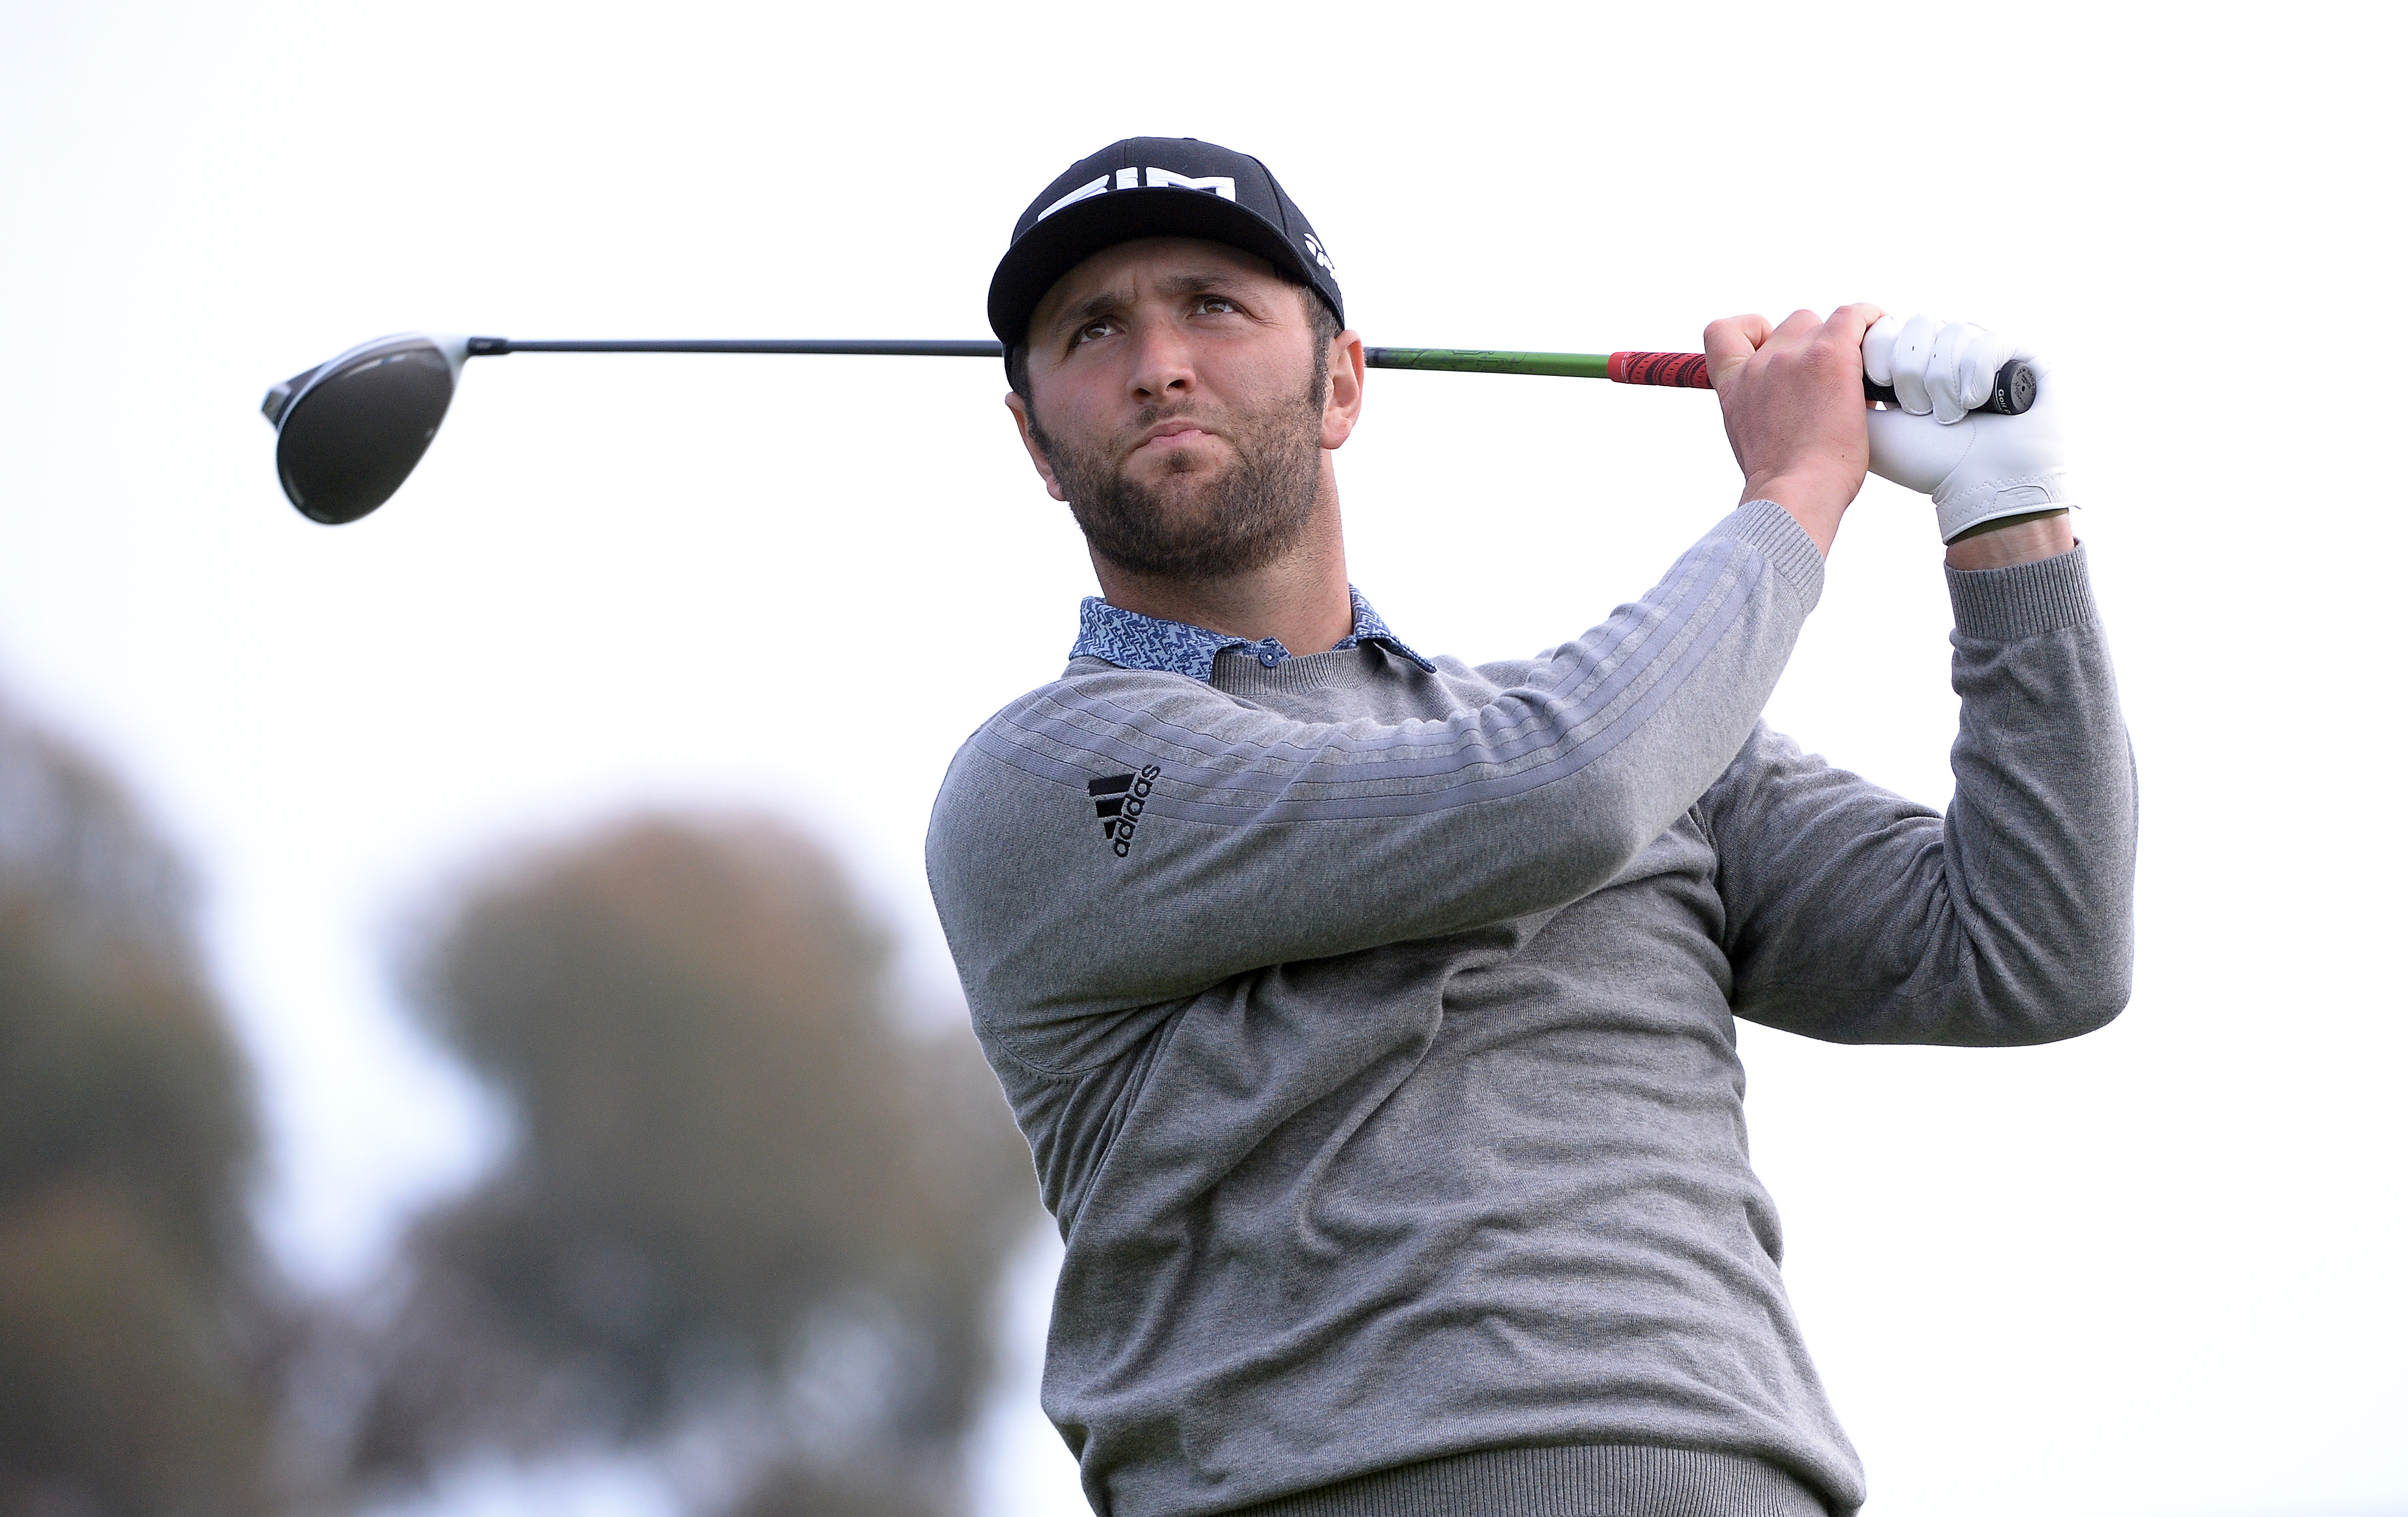 Jon Rahm thought he had forced a playoff with Marc Leishman